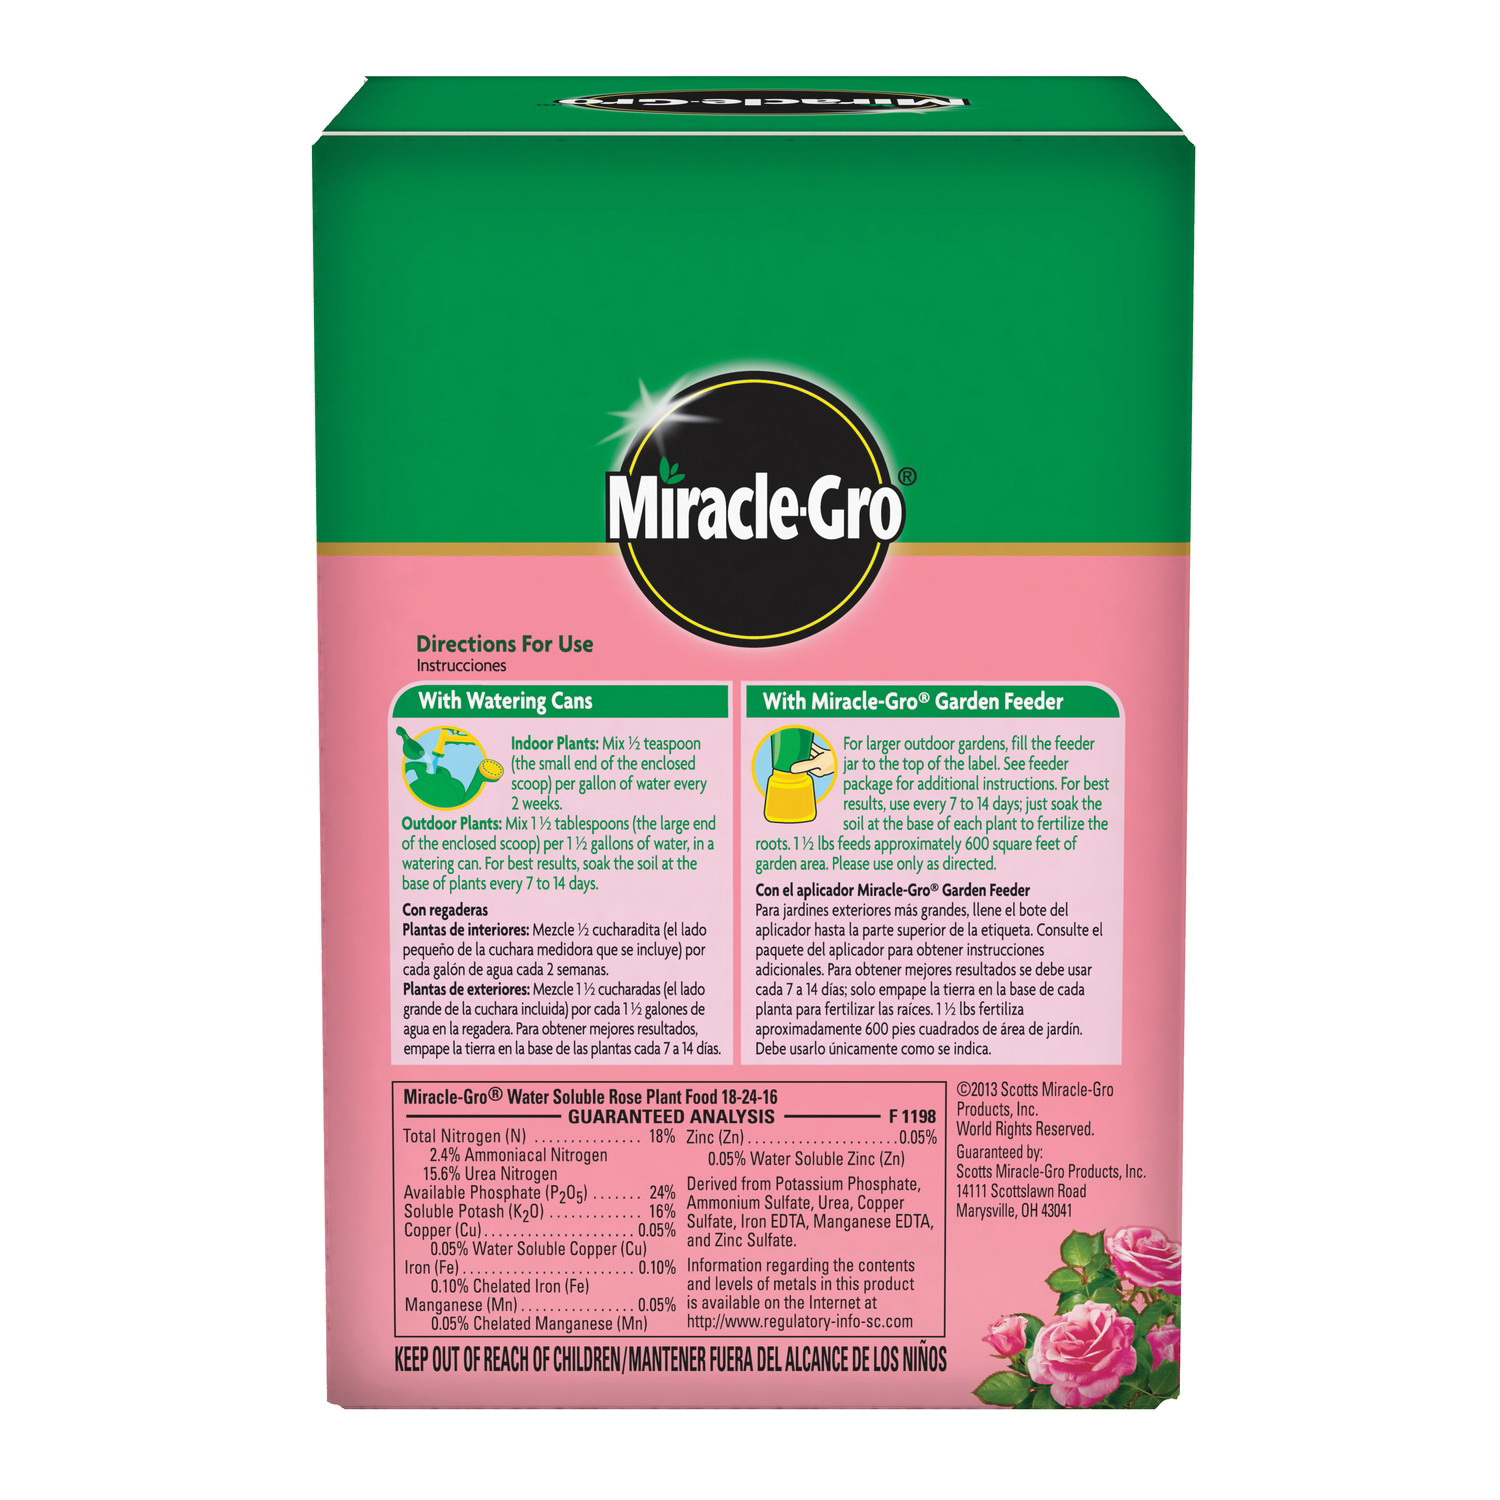 Miracle-Gro 2000221 Plant Food, 1.5 lb Box, Solid, 18-24-16 N-P-K Ratio - 2